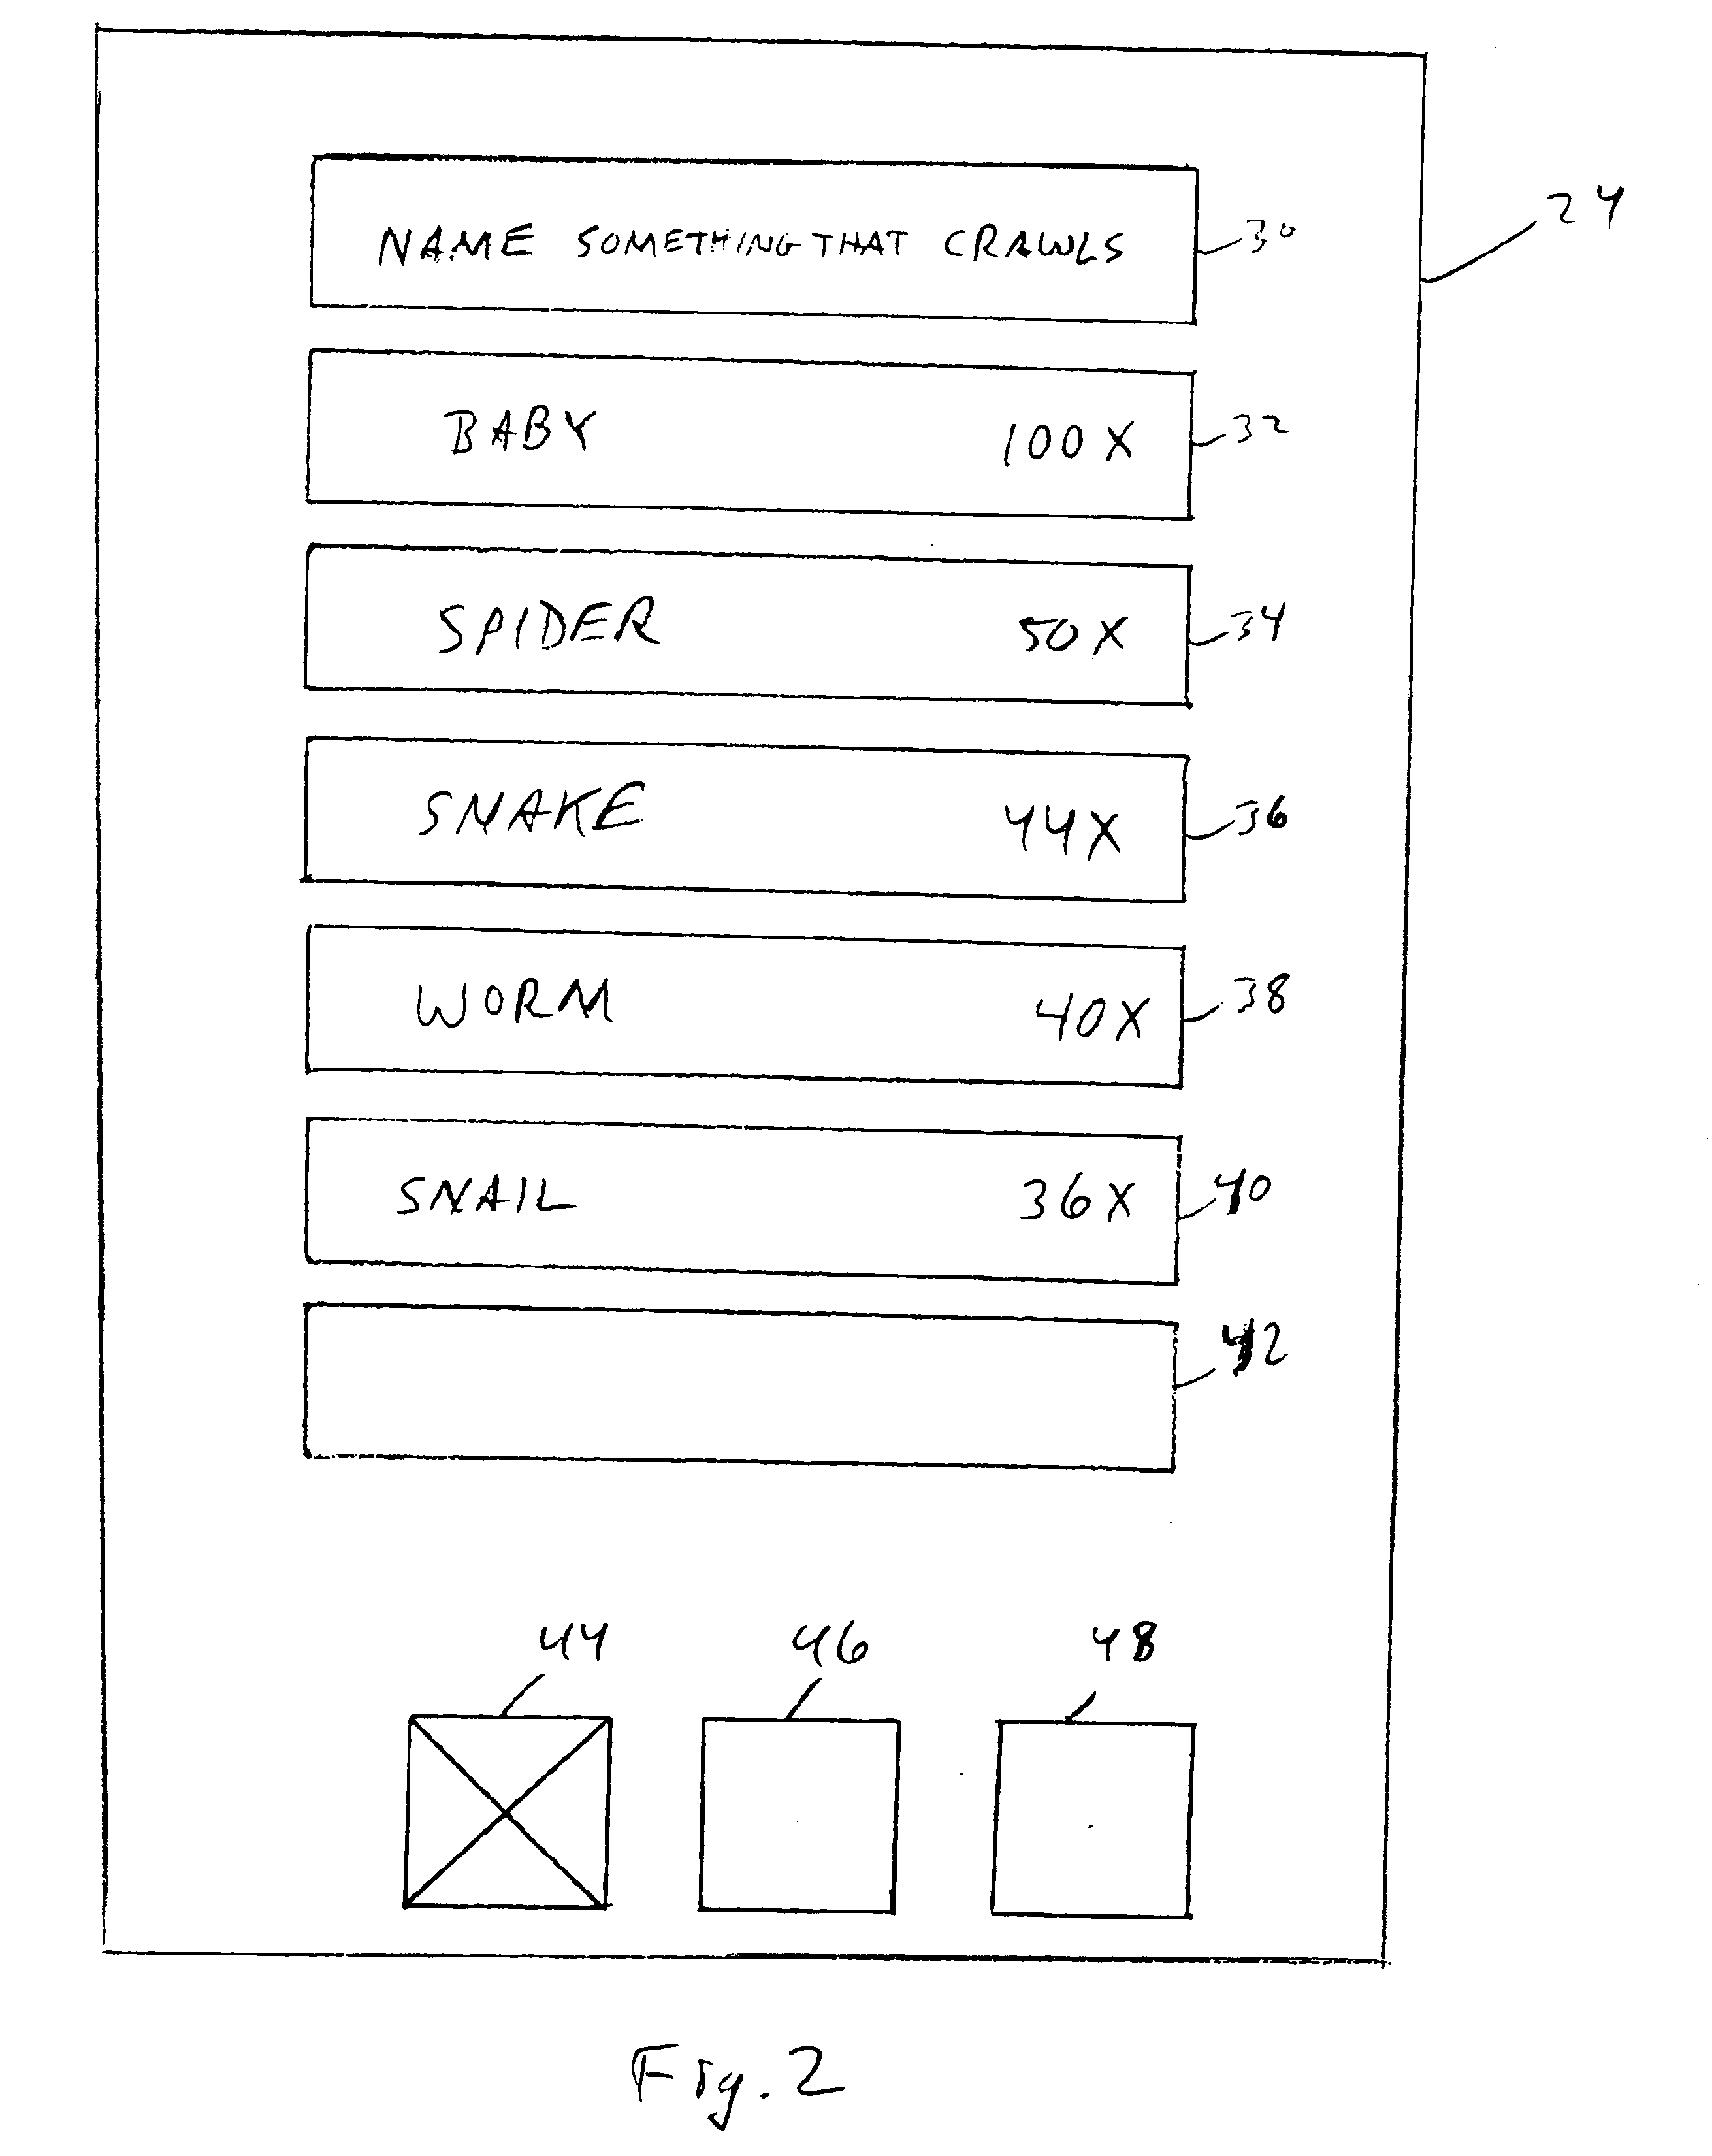 Method of playing a game involving questions and answers